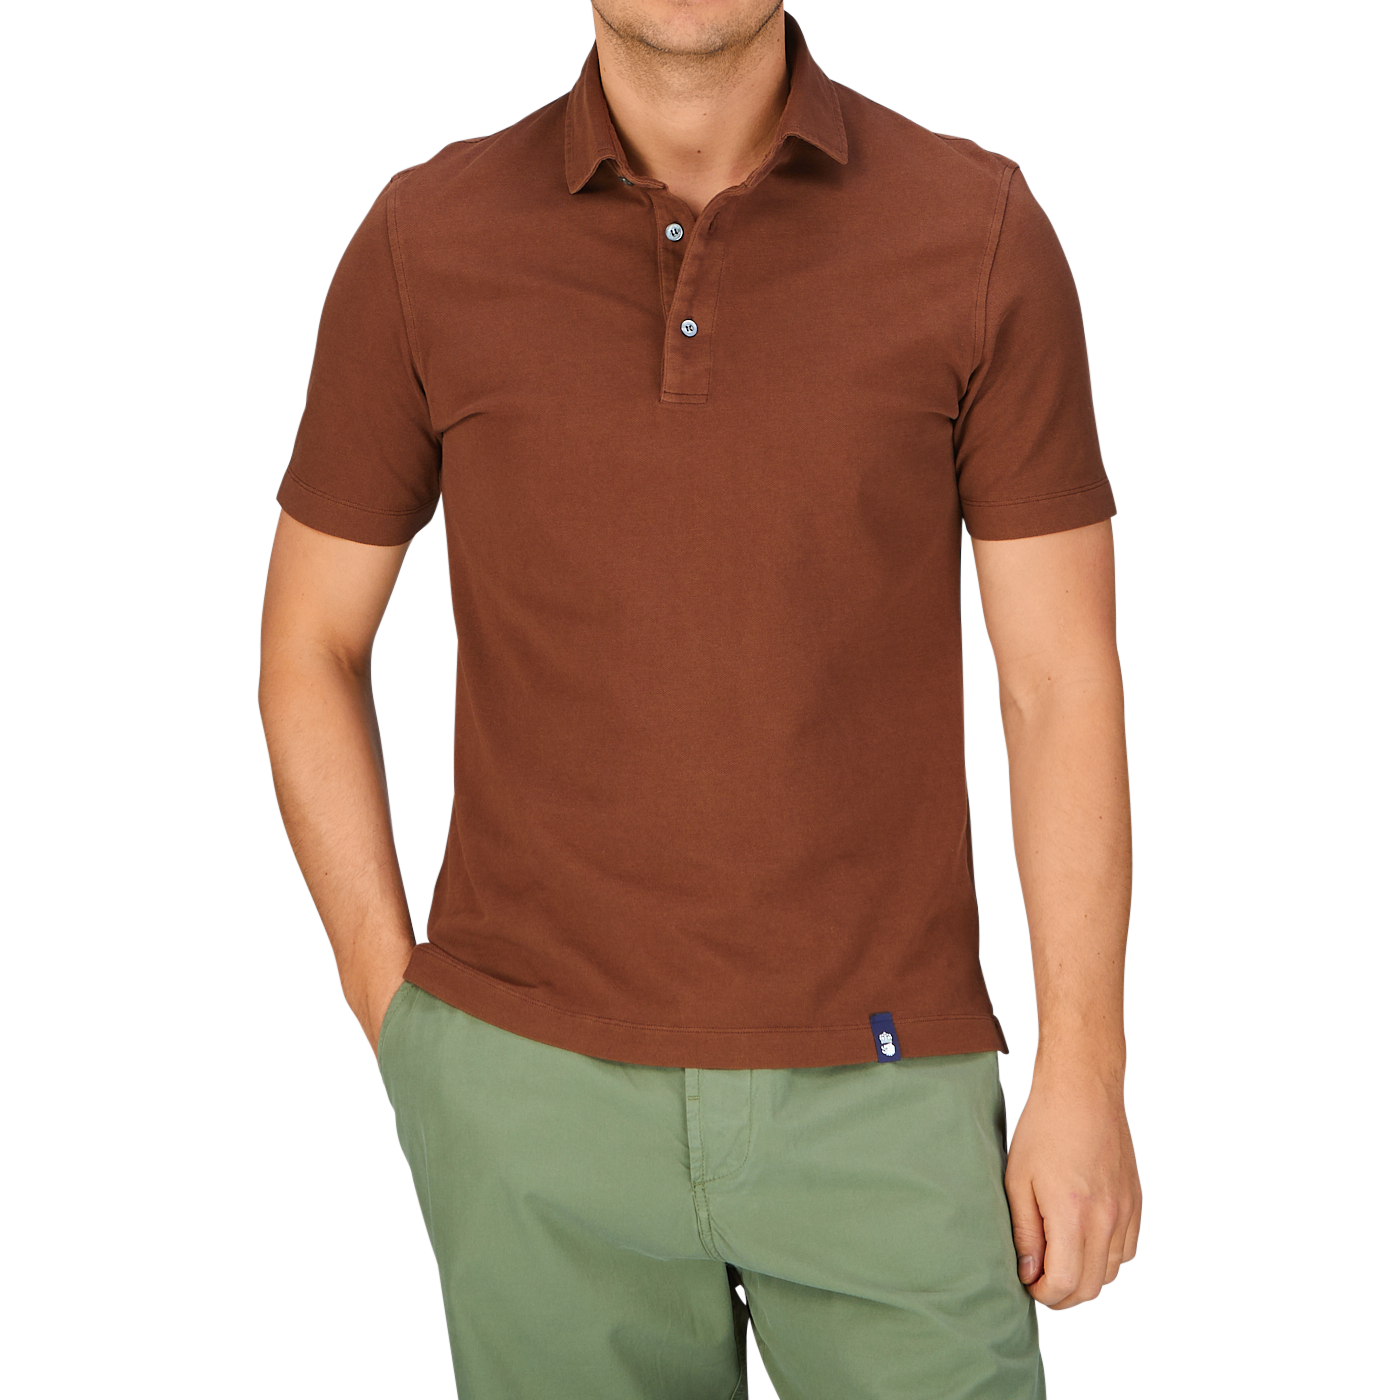 Man wearing a slim fit Drumohr Coffee Brown Cotton Piquet polo shirt and green shorts.